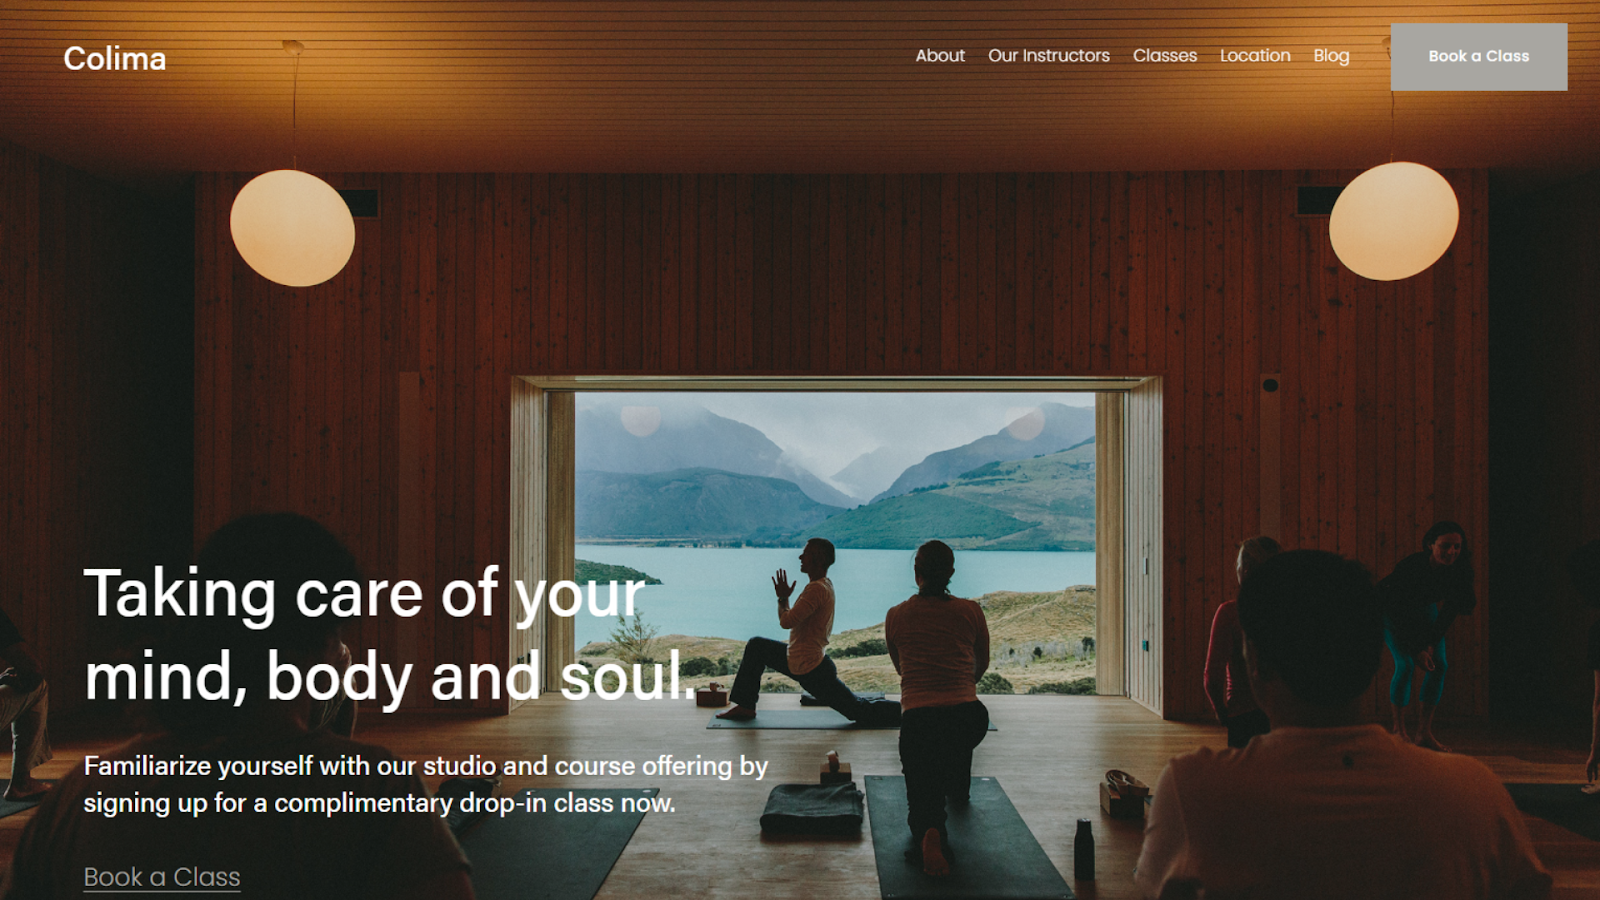 best-squarespace-templates-for-churches-5.png